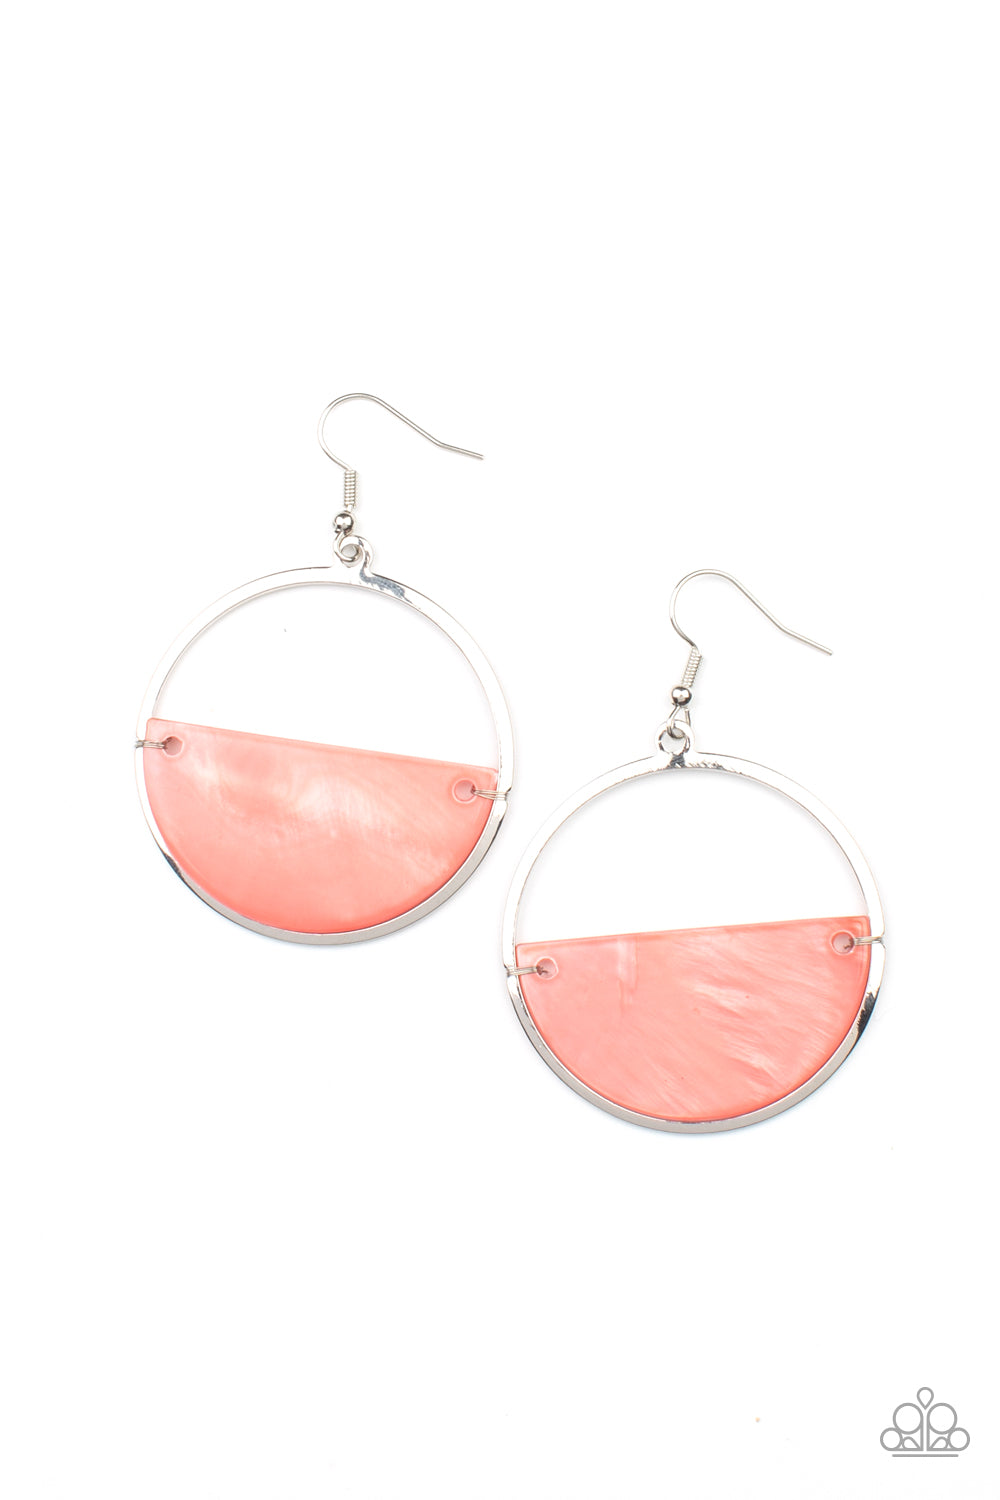 Seashore Vibes Orange Earring - Paparazzi Accessories  Brushed in an iridescent shimmer, a Burnt Coral half moon shell attaches to the bottom of a flat silver hoop for a summery splash of color. Earring attaches to a standard fishhook fitting.  All Paparazzi Accessories are lead free and nickel free!  Sold as one pair of earrings.